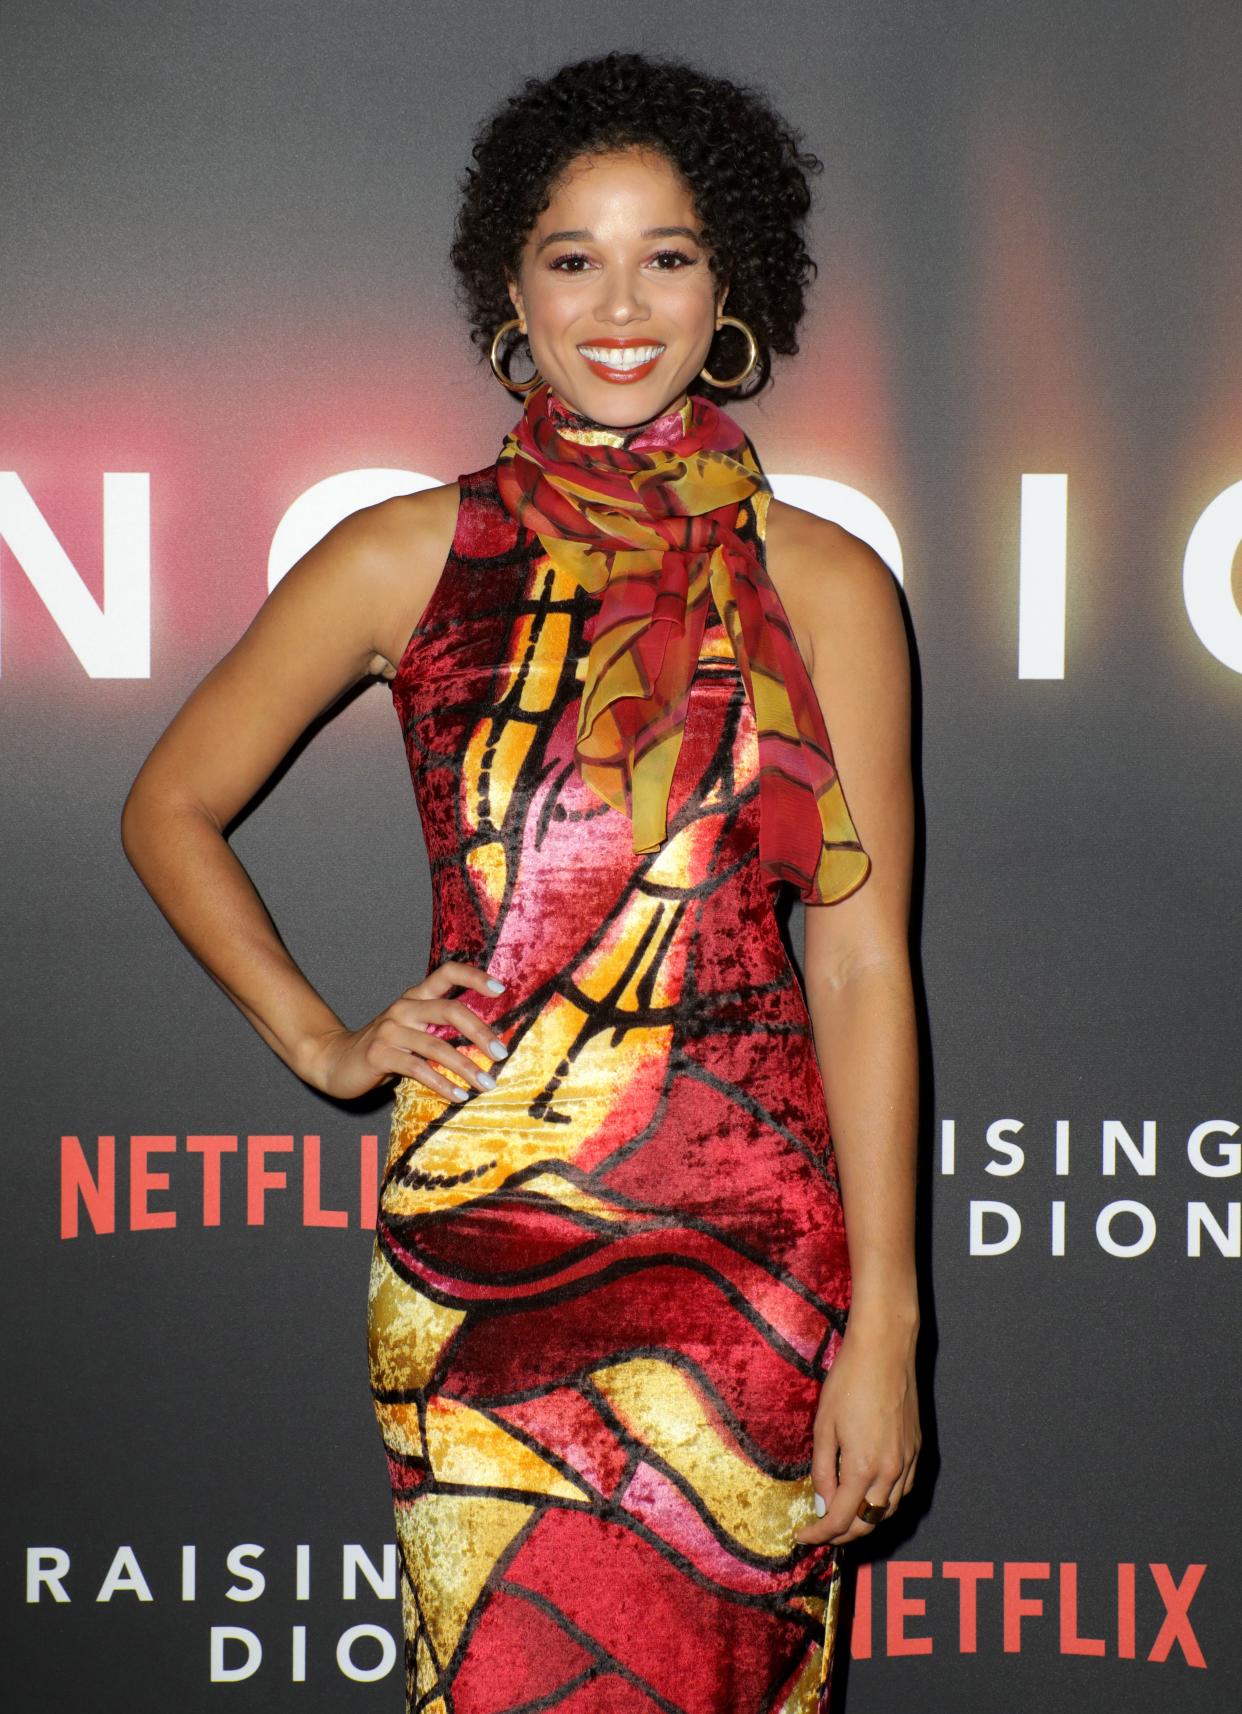 Alisha Wainwright poses with one hand on her hip at the Raising Dion premiere